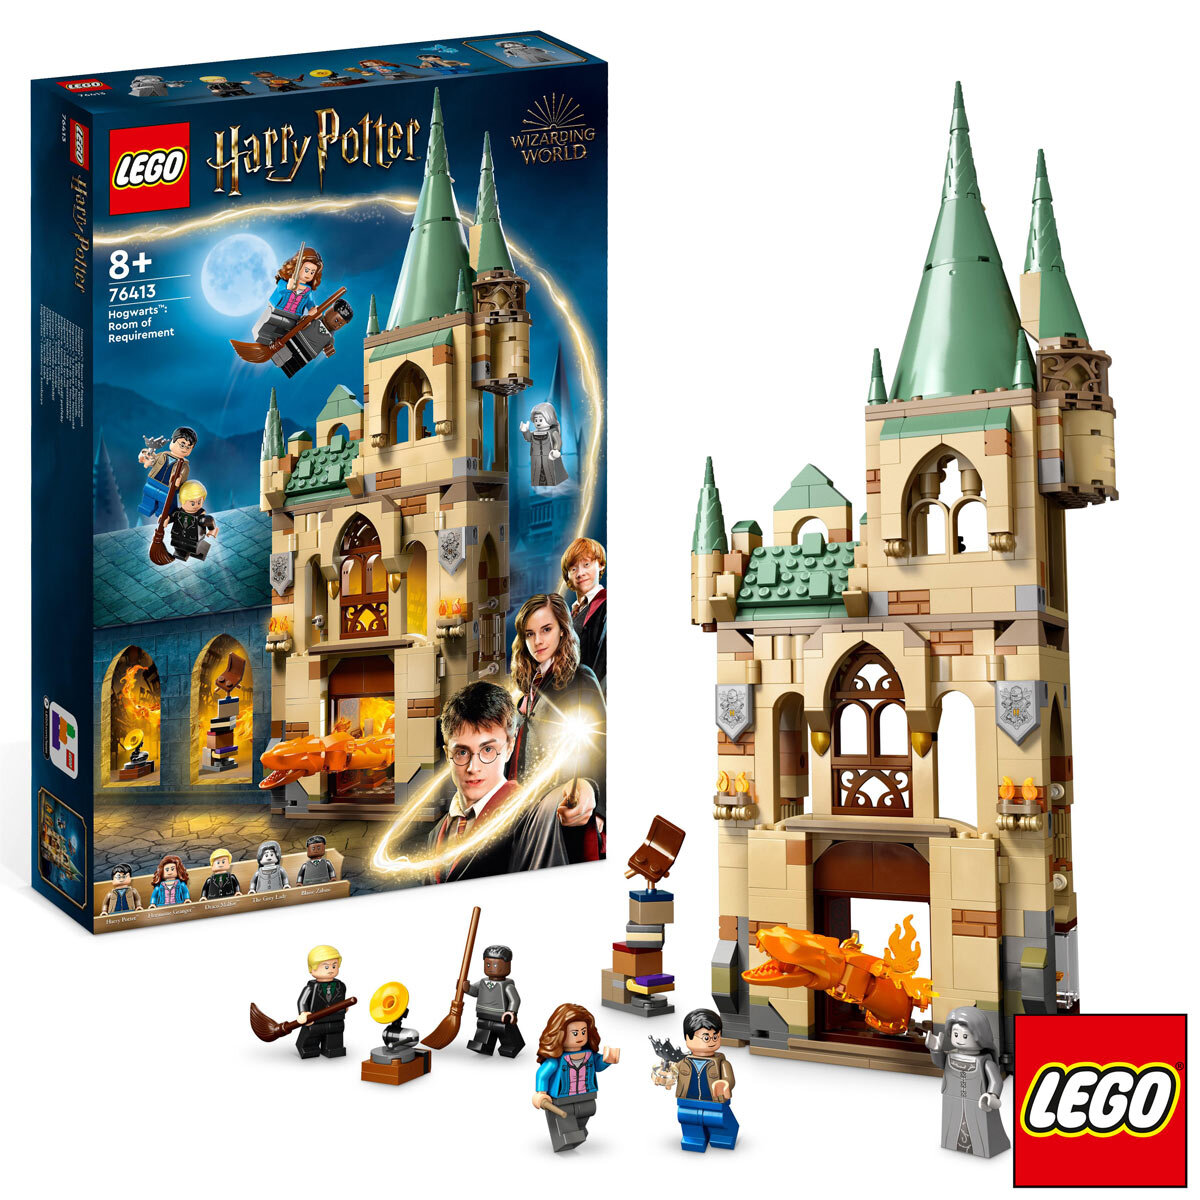 Buy LEGO Hogwarts: Room of Requirement Box & Item Image at Costco.co.uk